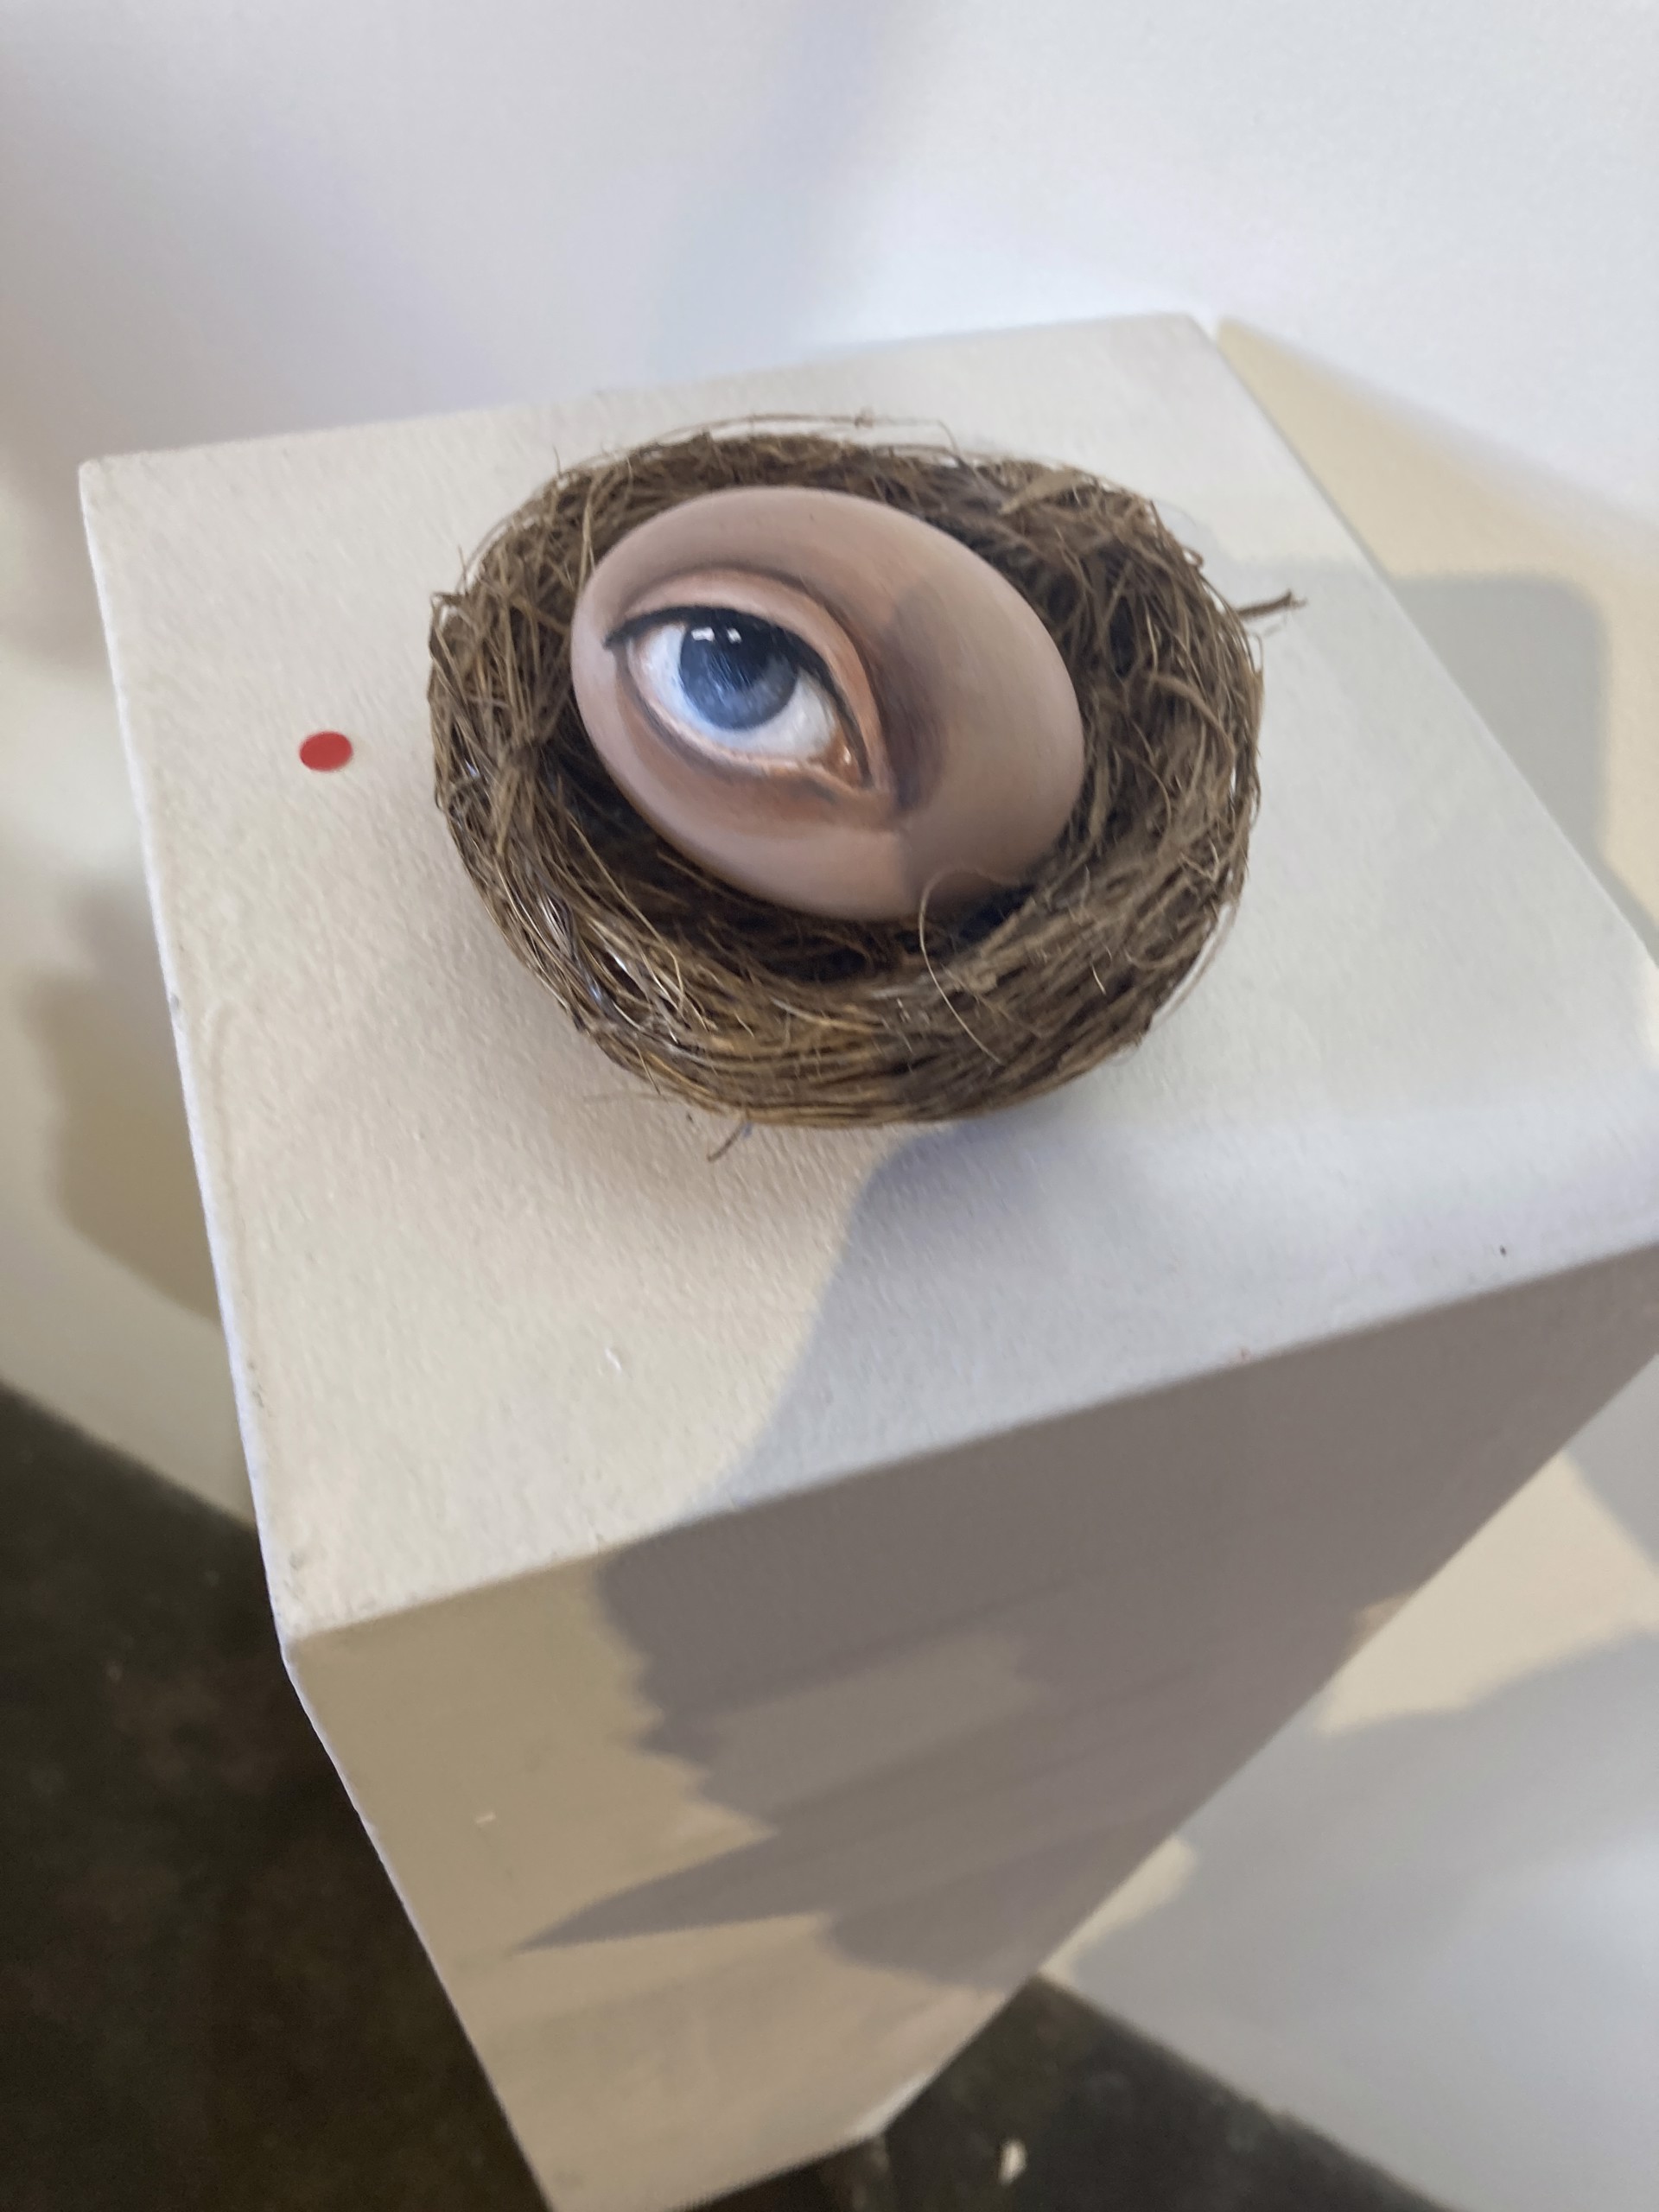 The Egg and the Eye by Alexandra Dillon